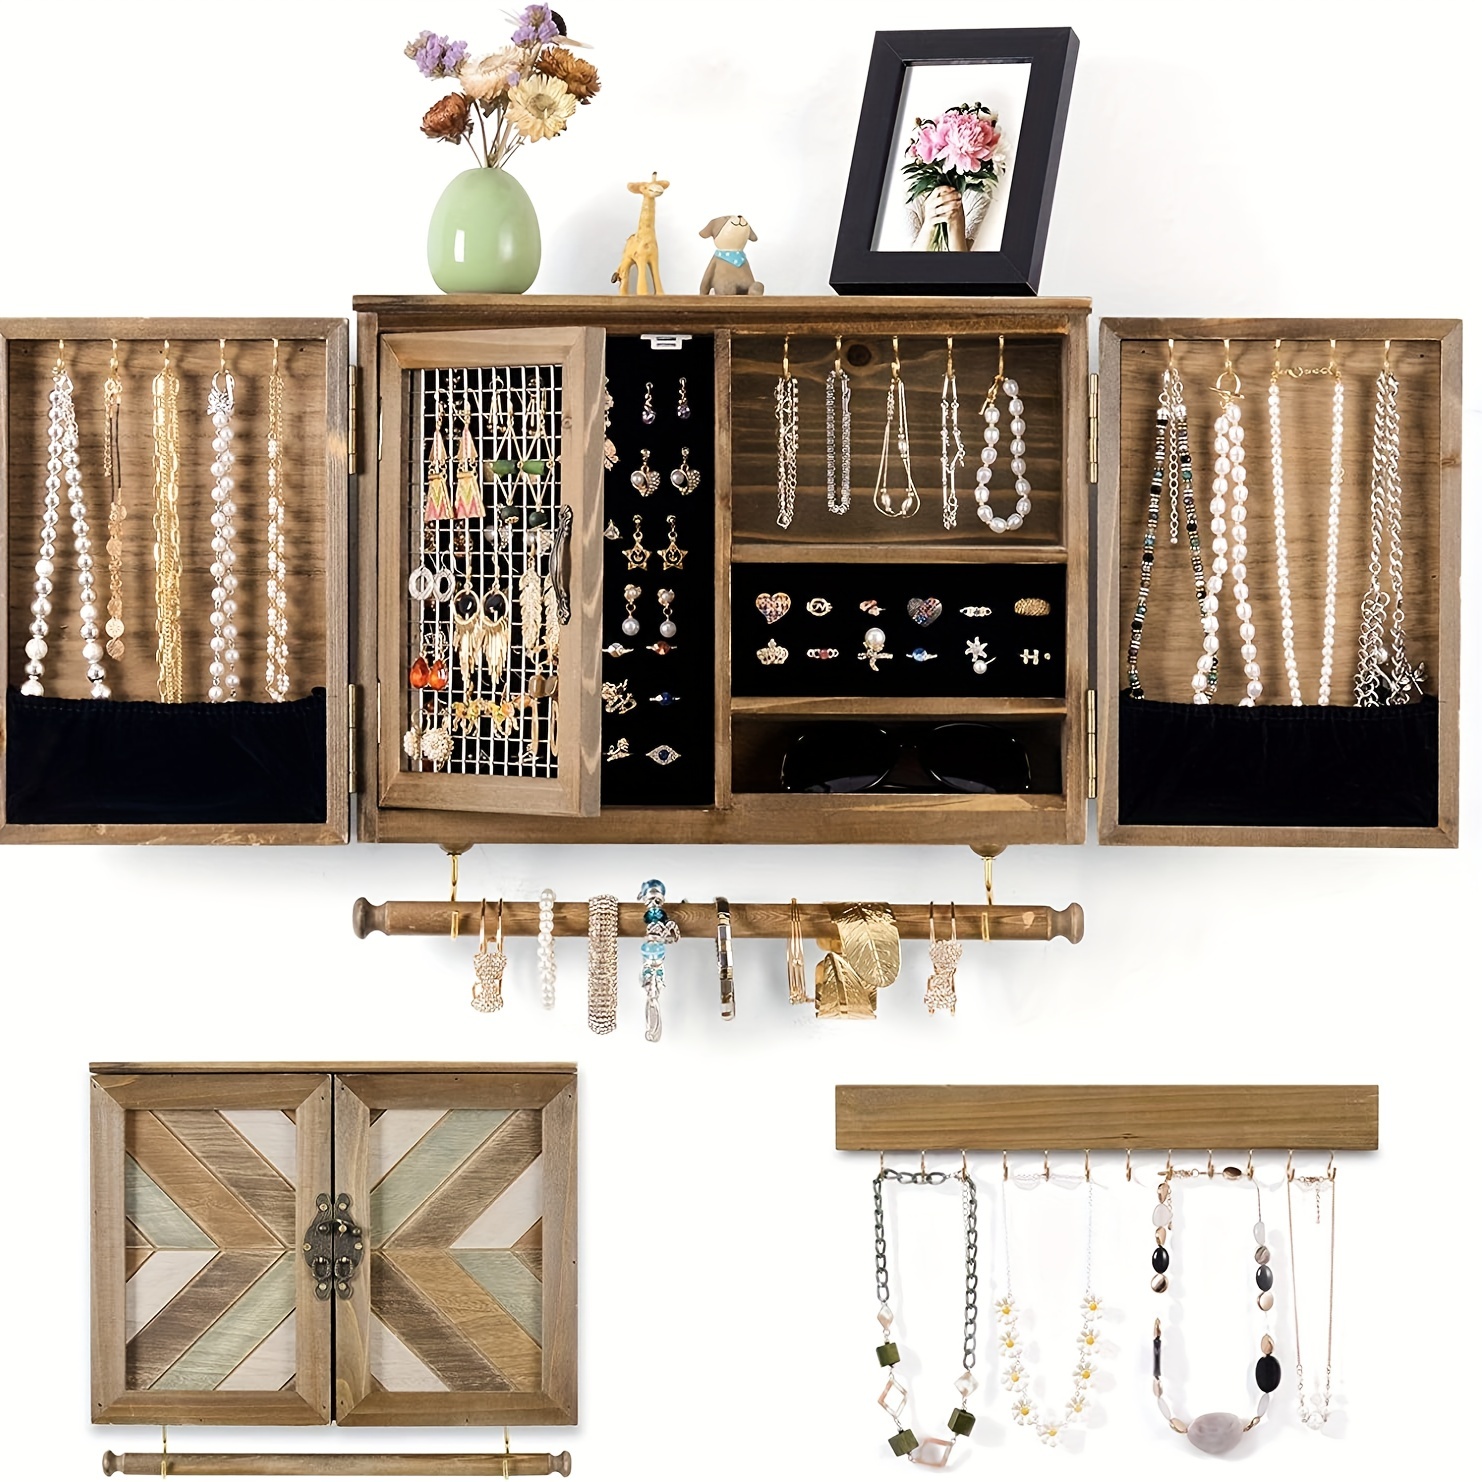 Dropship 4Tier Tabletop Wooden Jewelry Display Stand Necklace Accessories  Holder Organizer Rack Hanger With Ring Tray 8 Hooks 24 Earring Holes to  Sell Online at a Lower Price